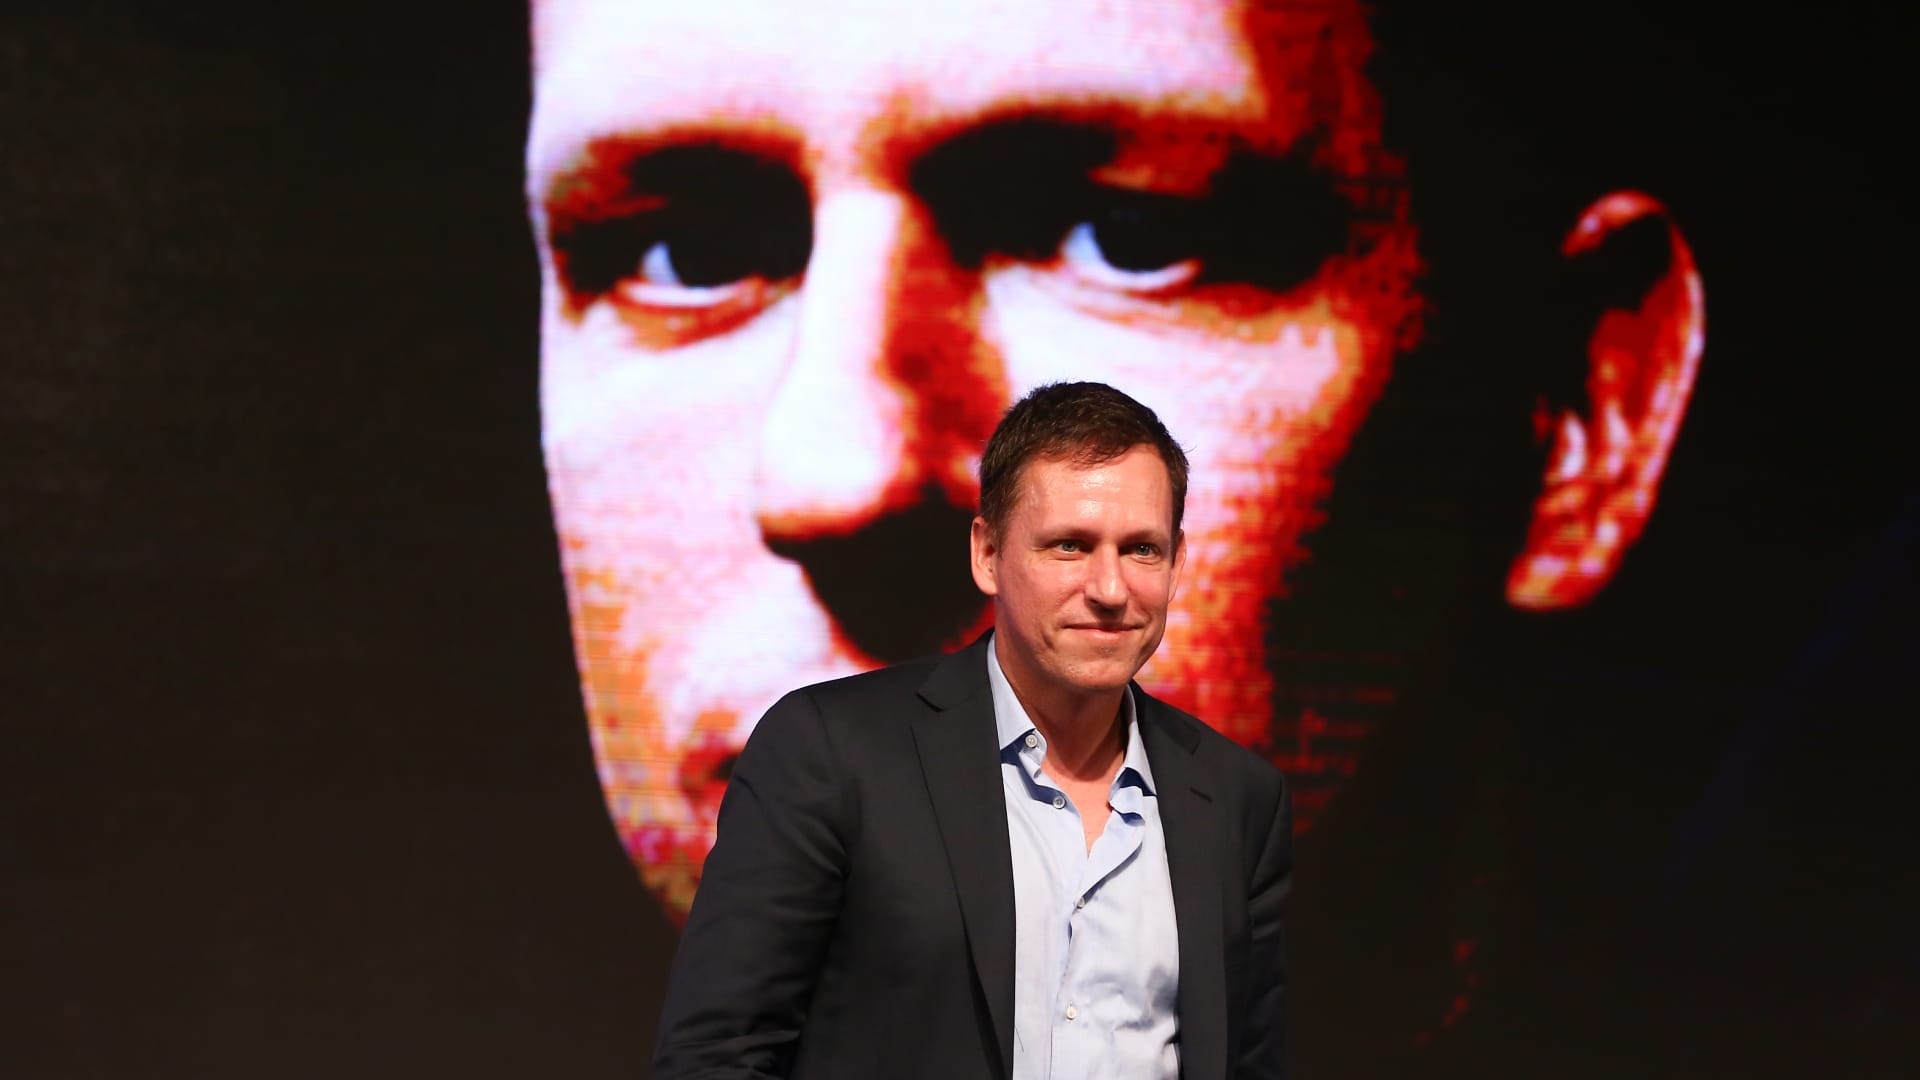 Peter Thiel, co-founder of PayPal Inc.